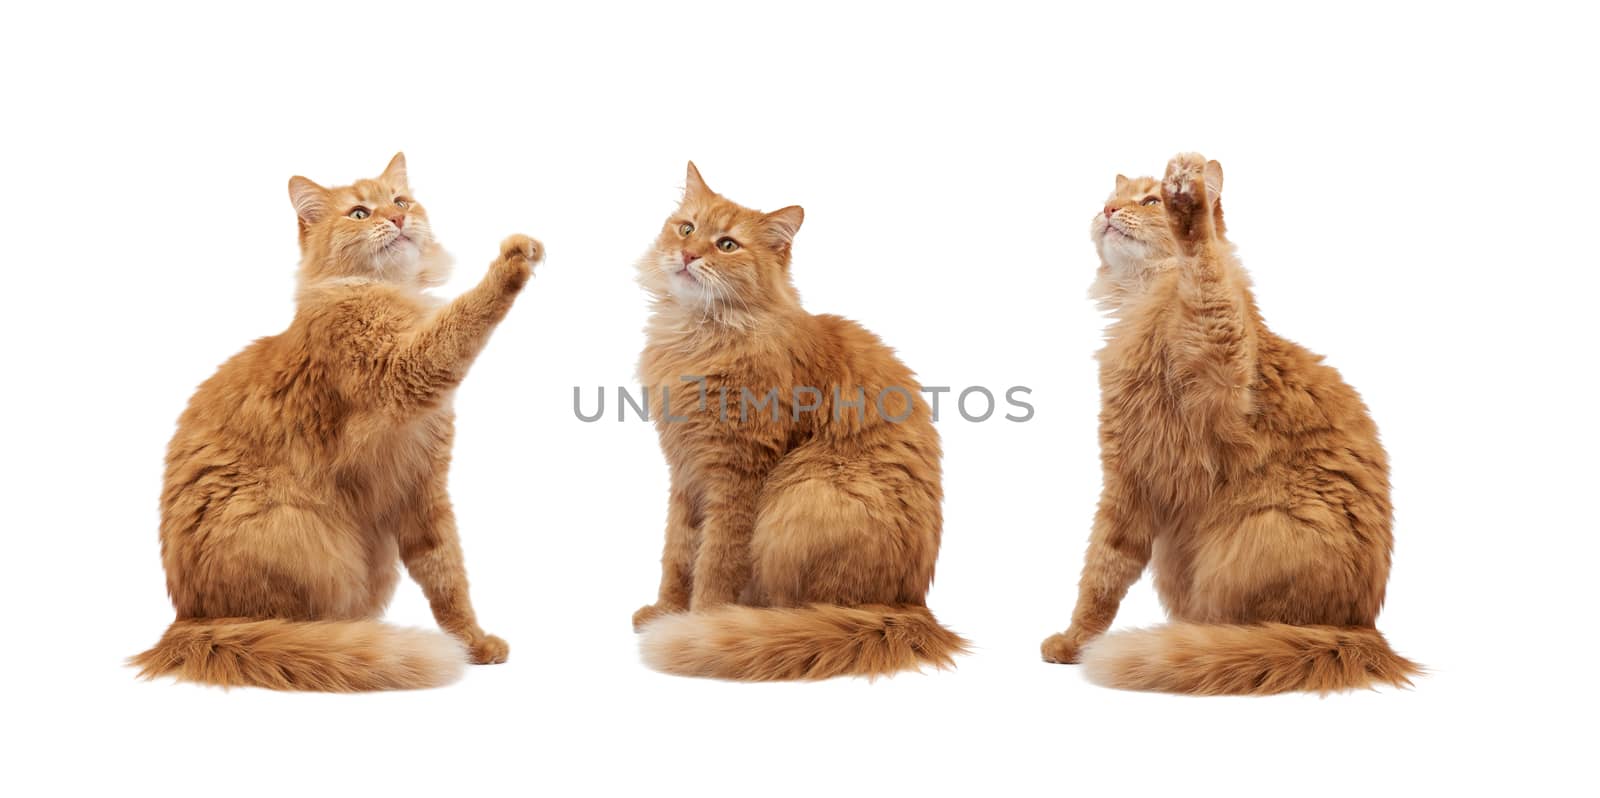 adult fluffy red cat sitting and raised its front paws up, imitation of holding any object, animal isolated on a white background, different poses